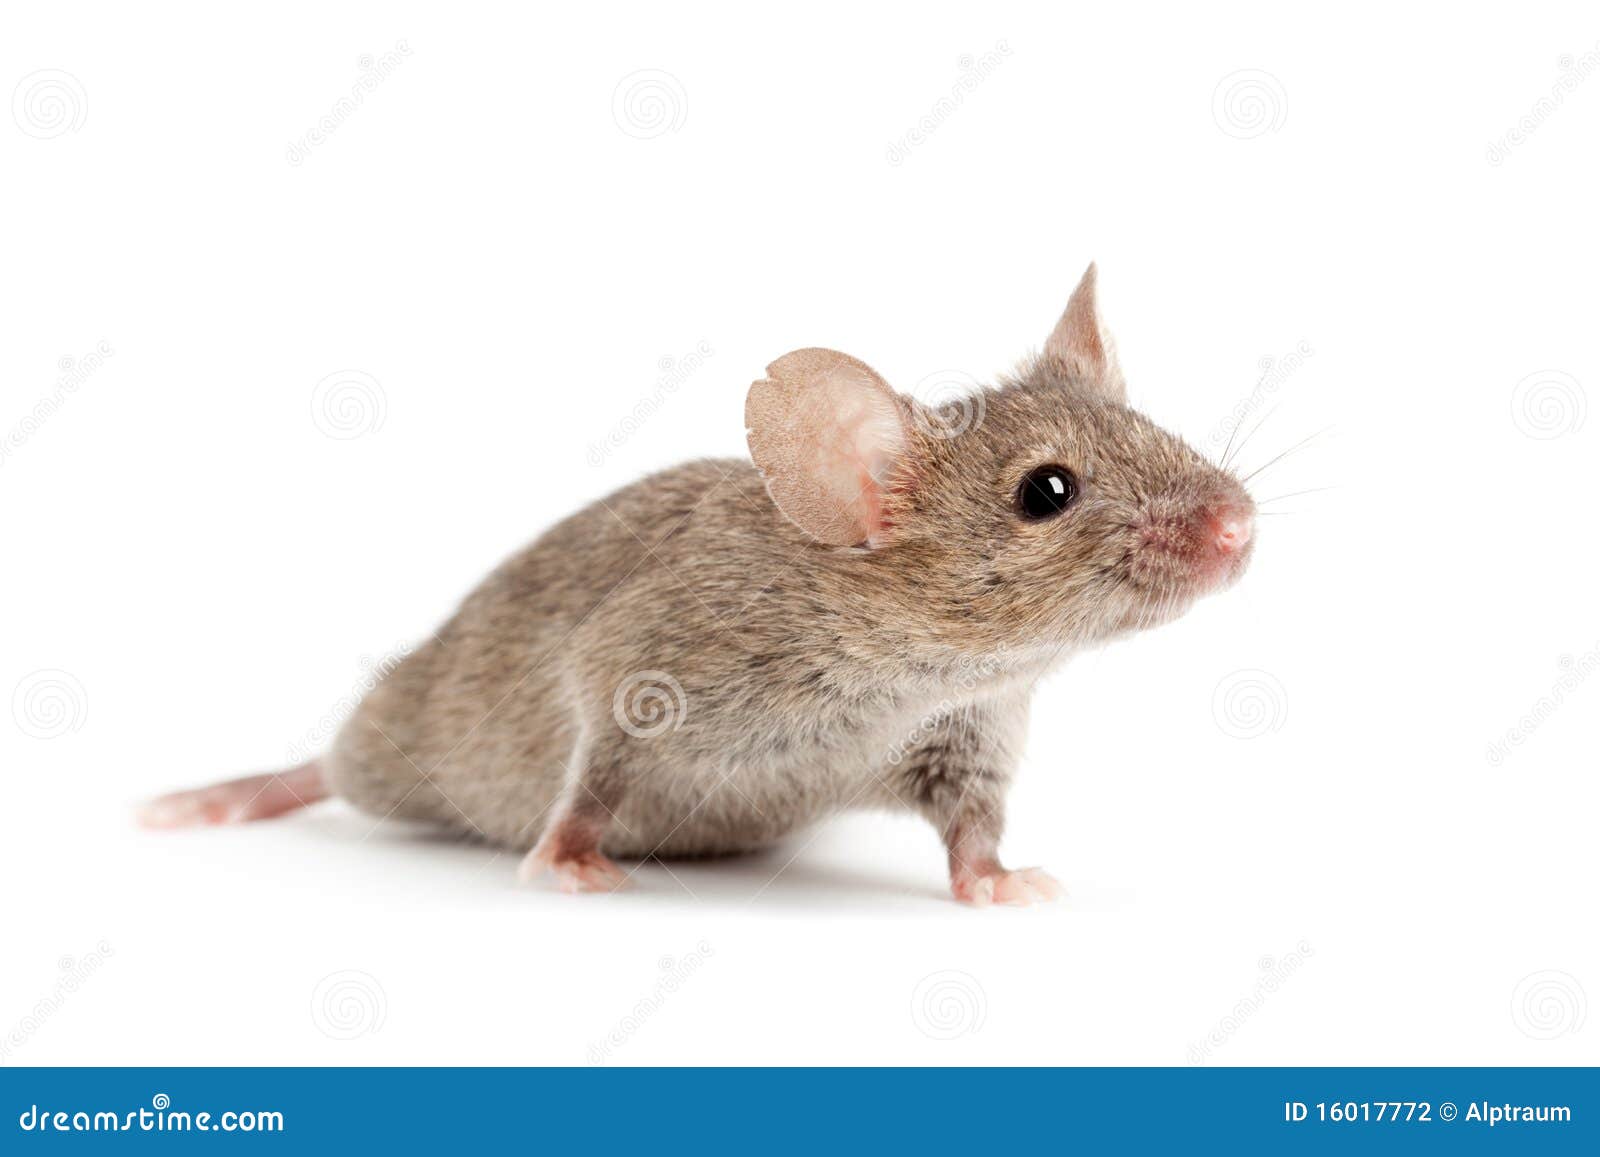 mouse  on white